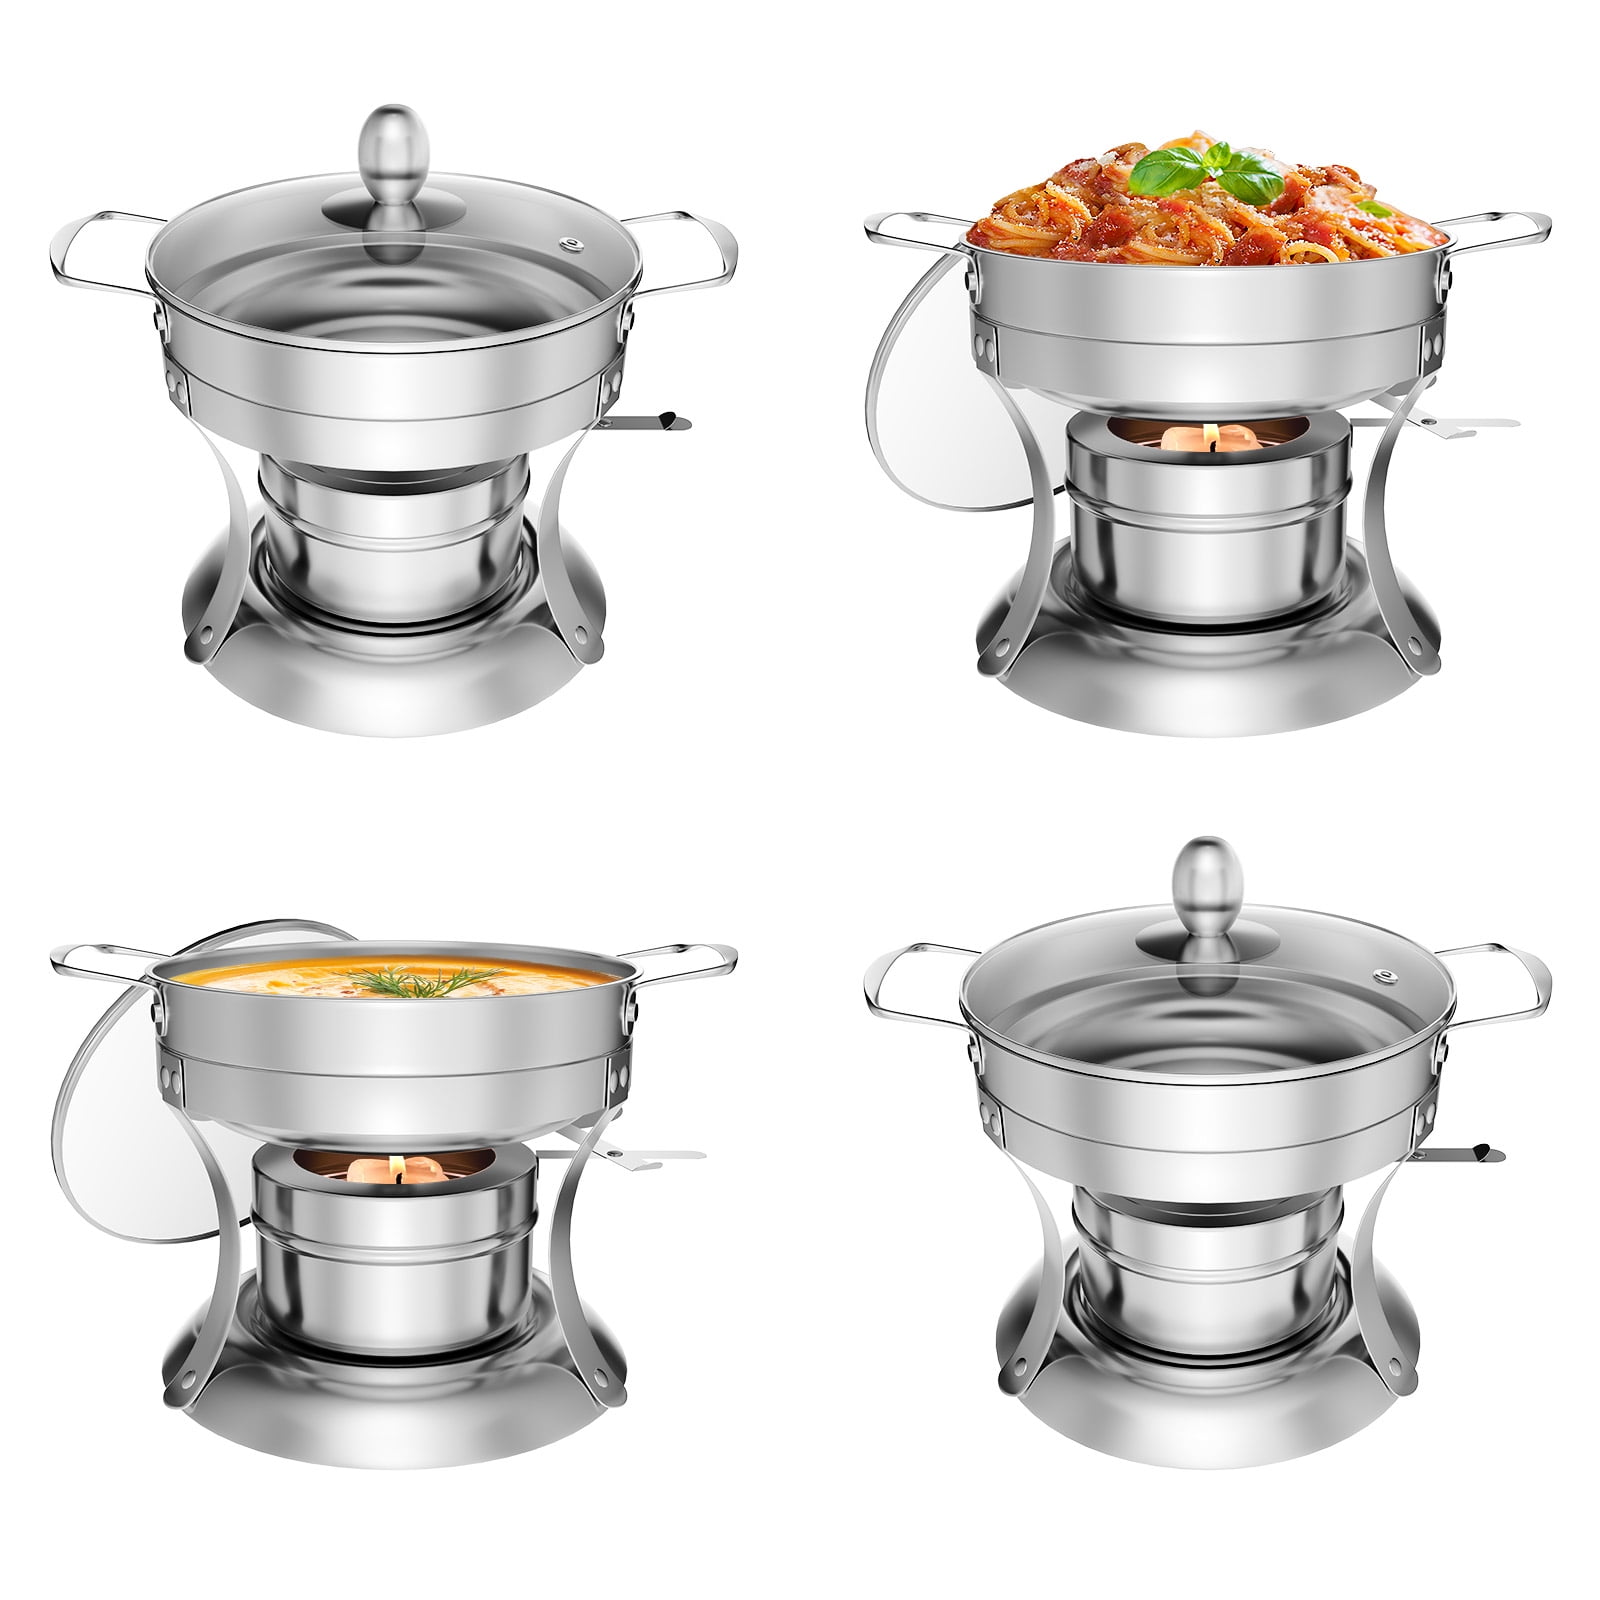 CHRYSLIN Stainless Steel Pot with Divider,Weldless Hot Pot,Two-Flavor Soup  Pot Shabu Shabu Pot,Induction Cookware with Toughened Glass Lid,12